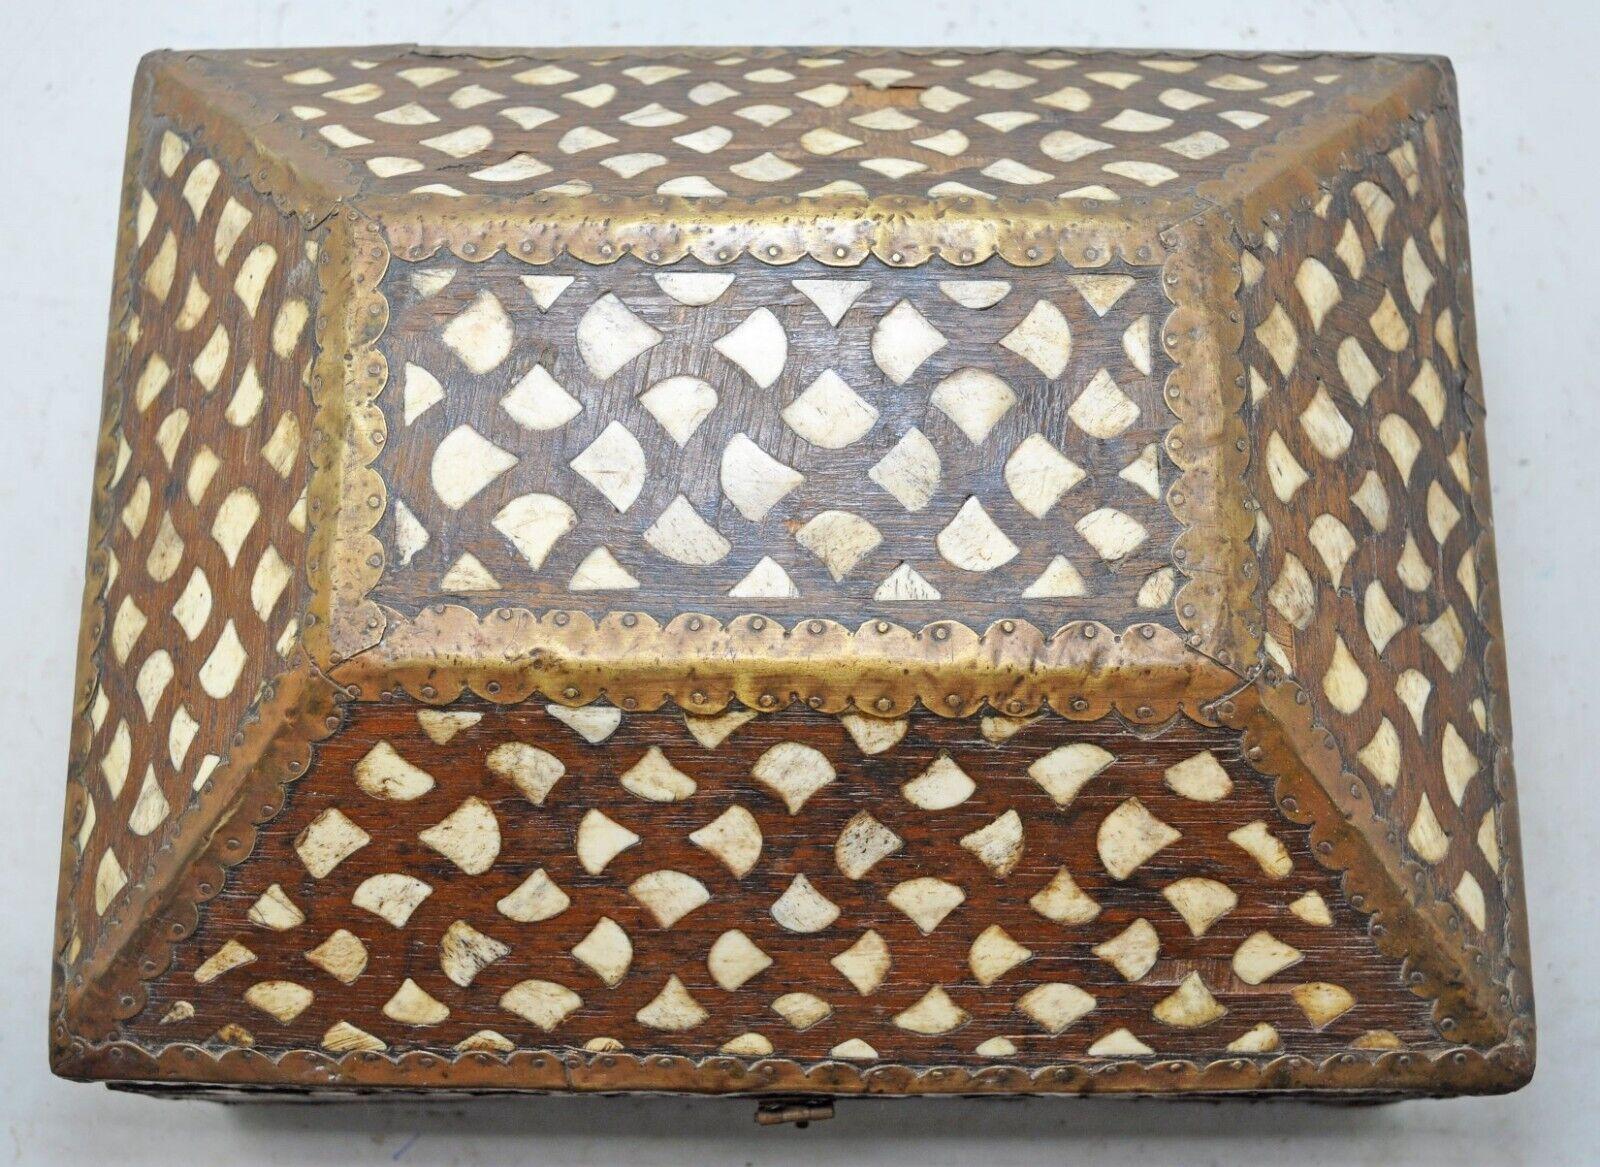 20th Century Antique Hand-Crafted Decorative Box with Distinctive Bone Inlay Pattern  For Sale